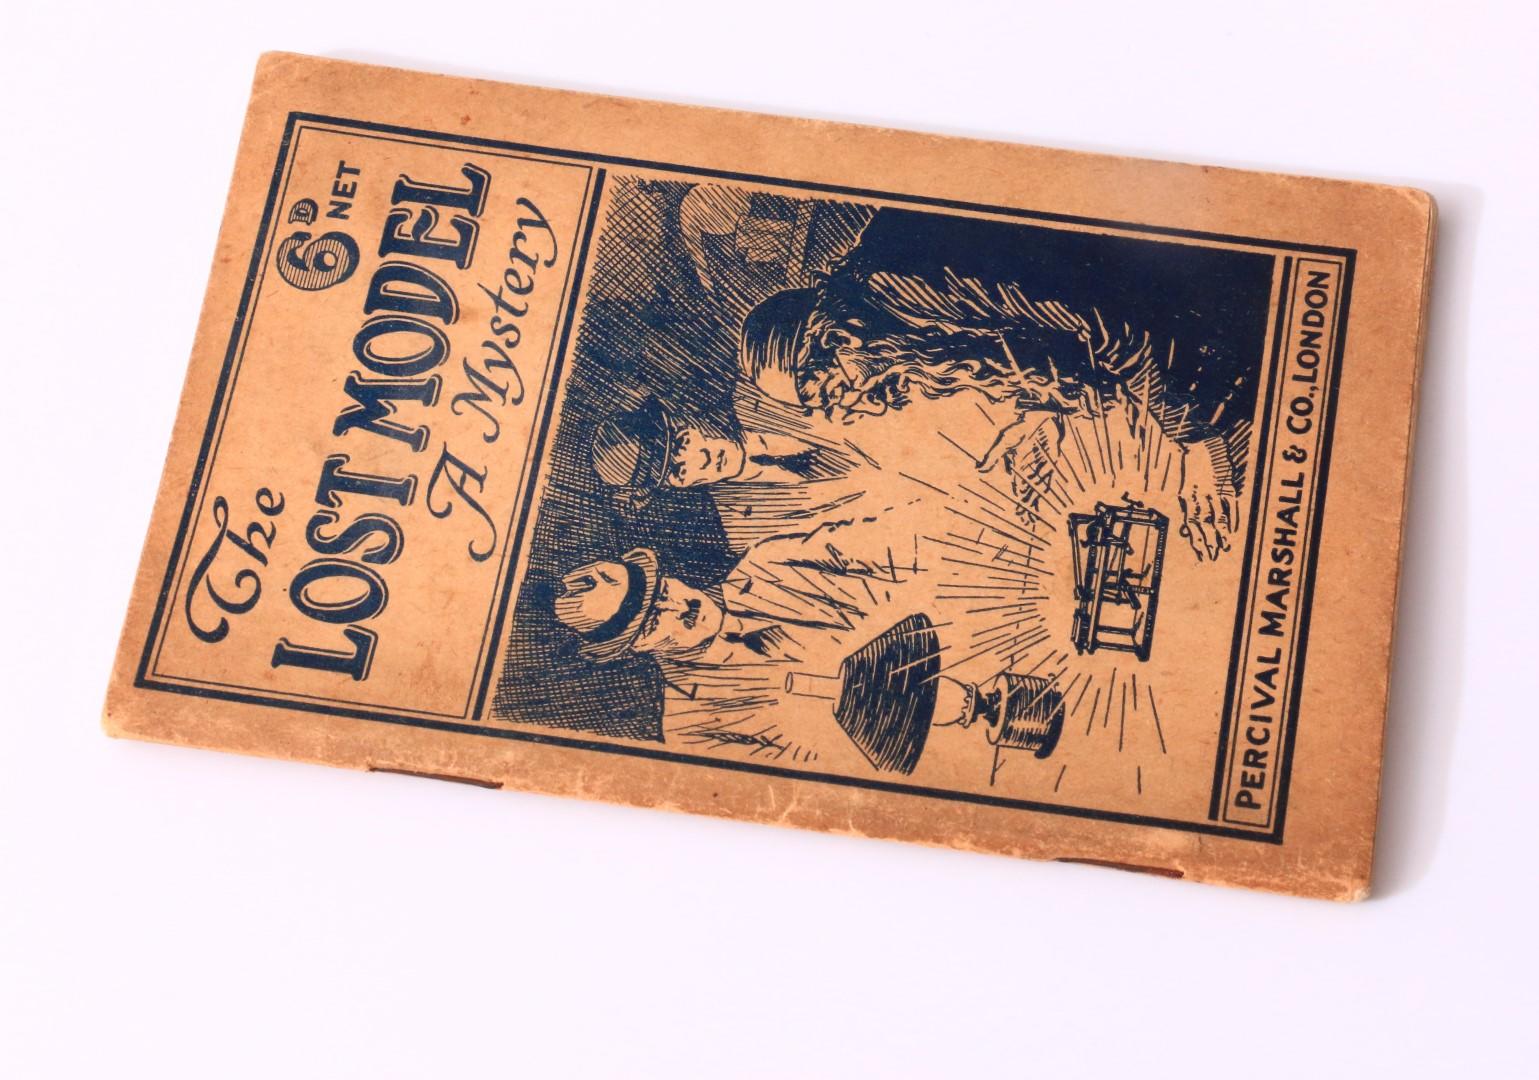 Alfred W. Marshall - The Lost Model: A Mystery - Percival Marshall & Co., n.d. [1923], First Edition.